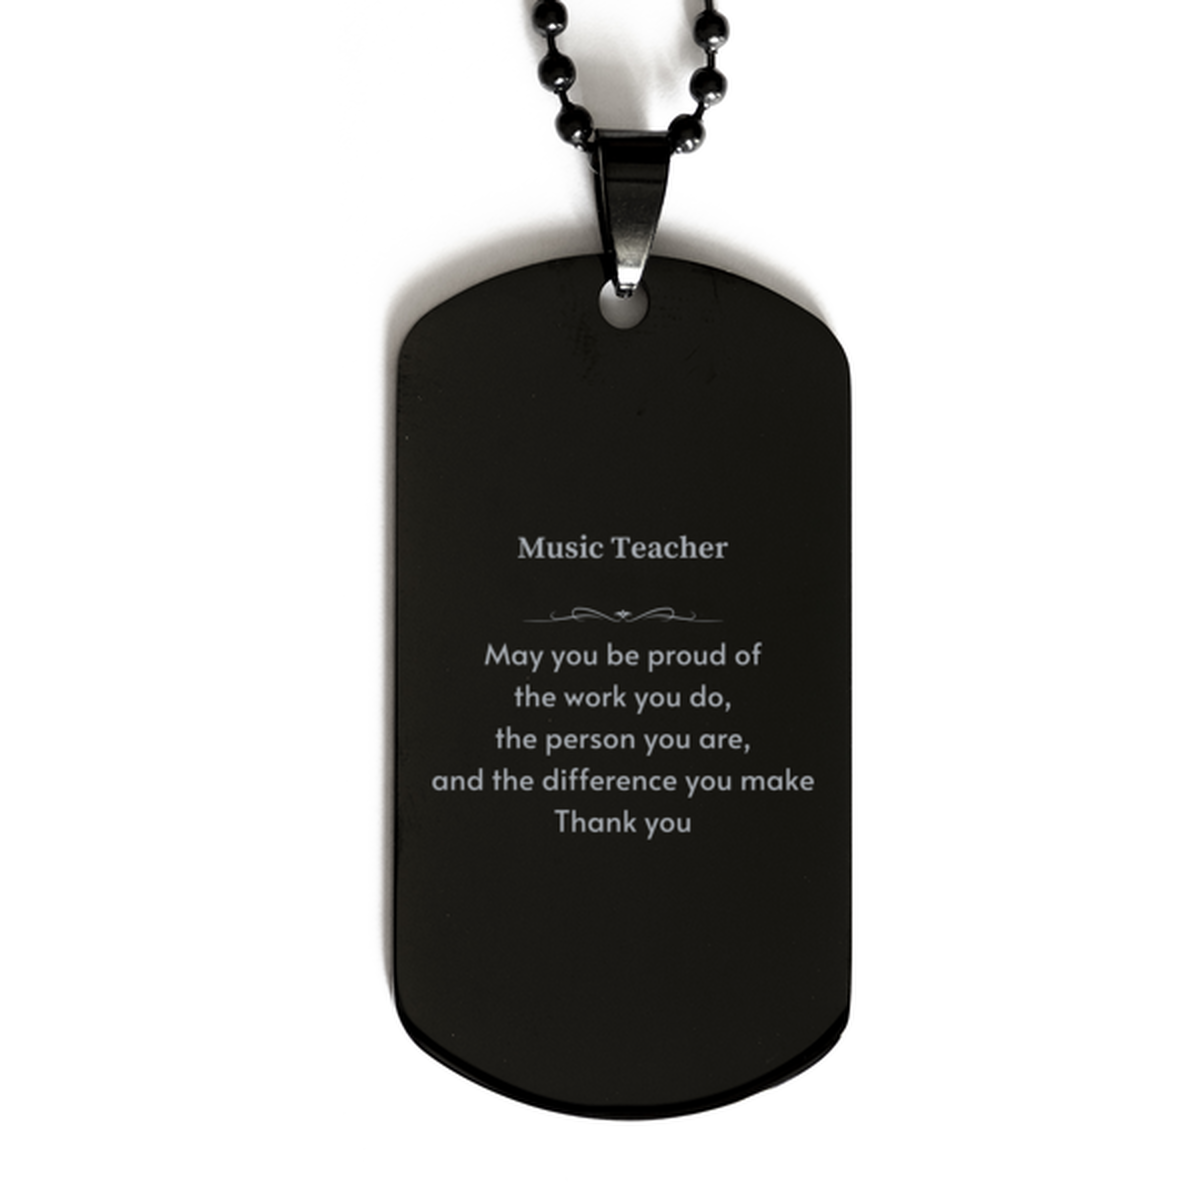 Heartwarming Black Dog Tag Retirement Coworkers Gifts for Music Teacher, Music Teacher May You be proud of the work you do, the person you are Gifts for Boss Men Women Friends